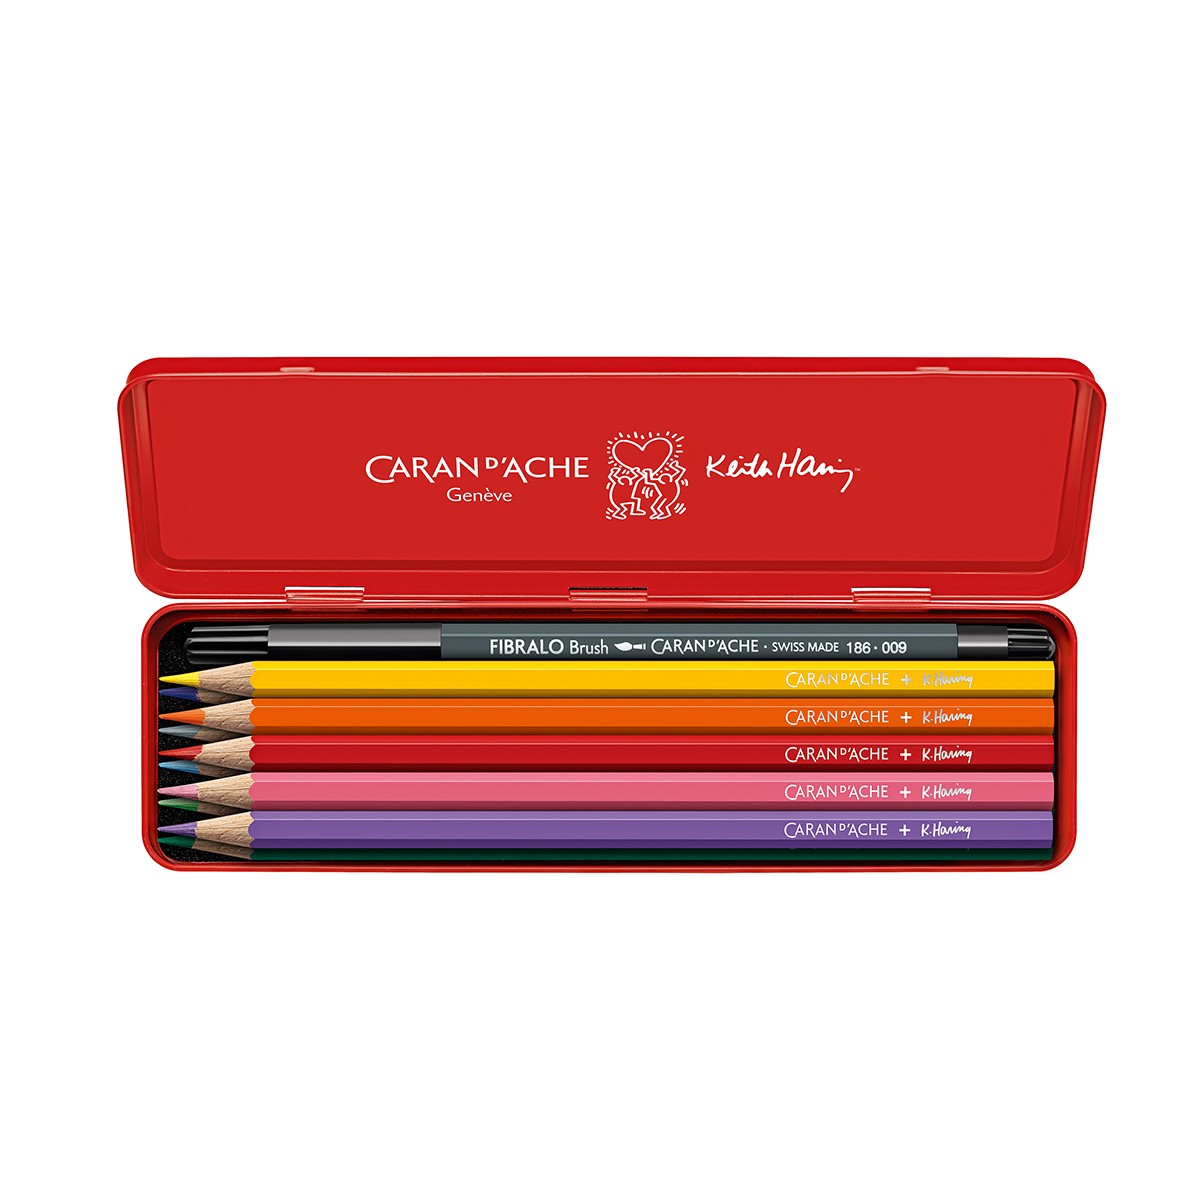 CARAN D'ACHE x Keith Haring Σετ Υδατοδιαλυτές Ξυλομπογιές 10 + 1 Special Edition